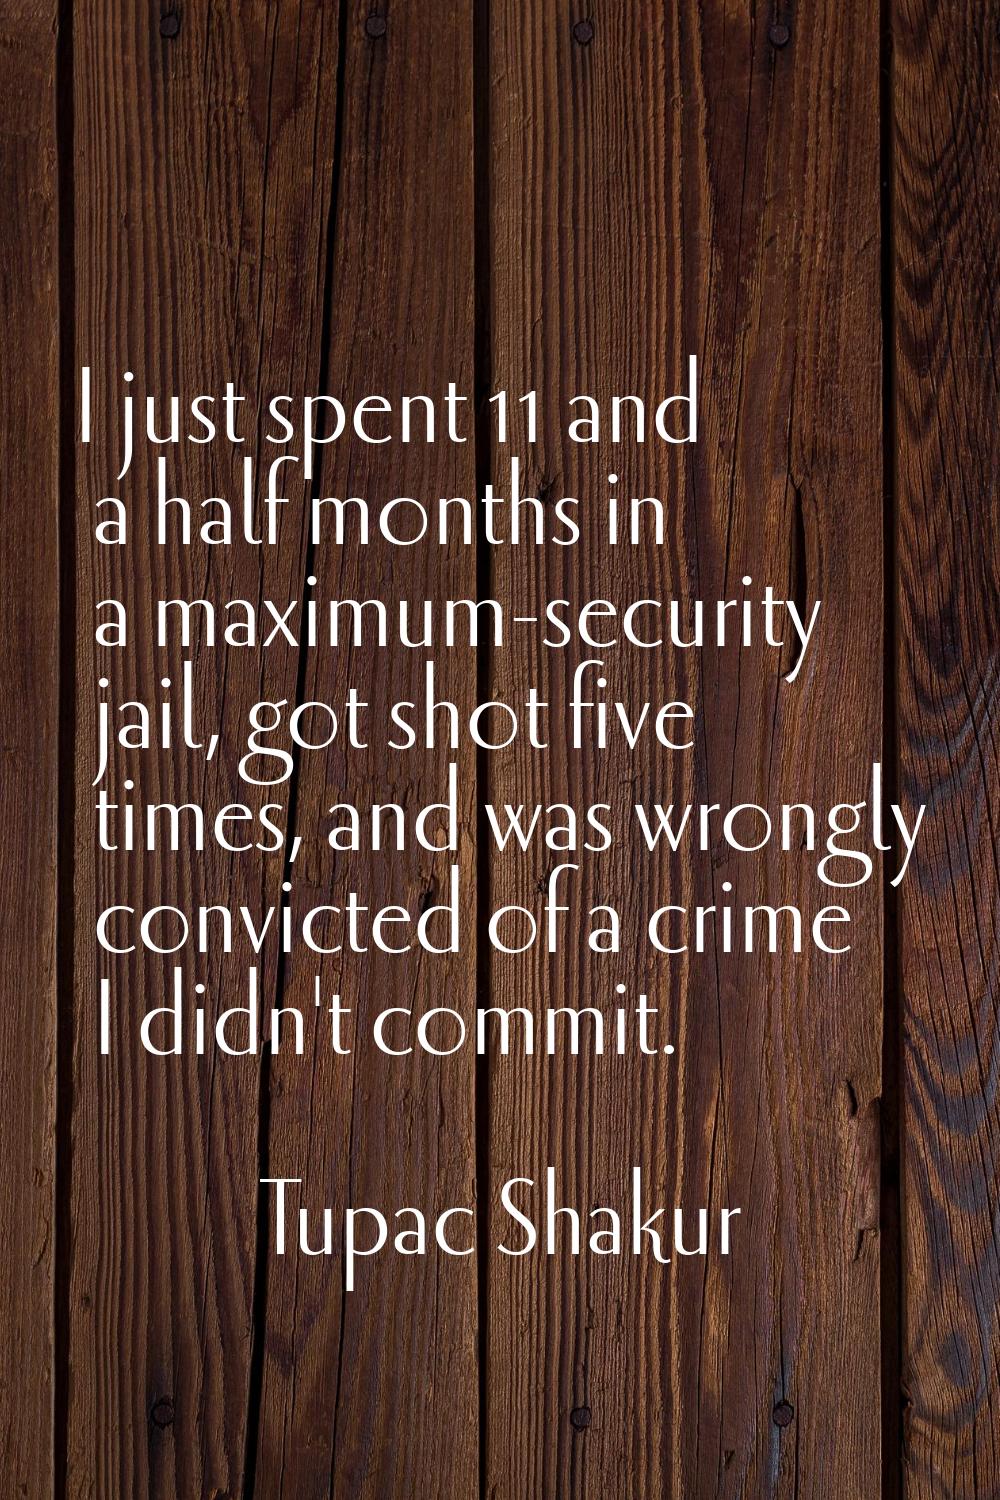 I just spent 11 and a half months in a maximum-security jail, got shot five times, and was wrongly 